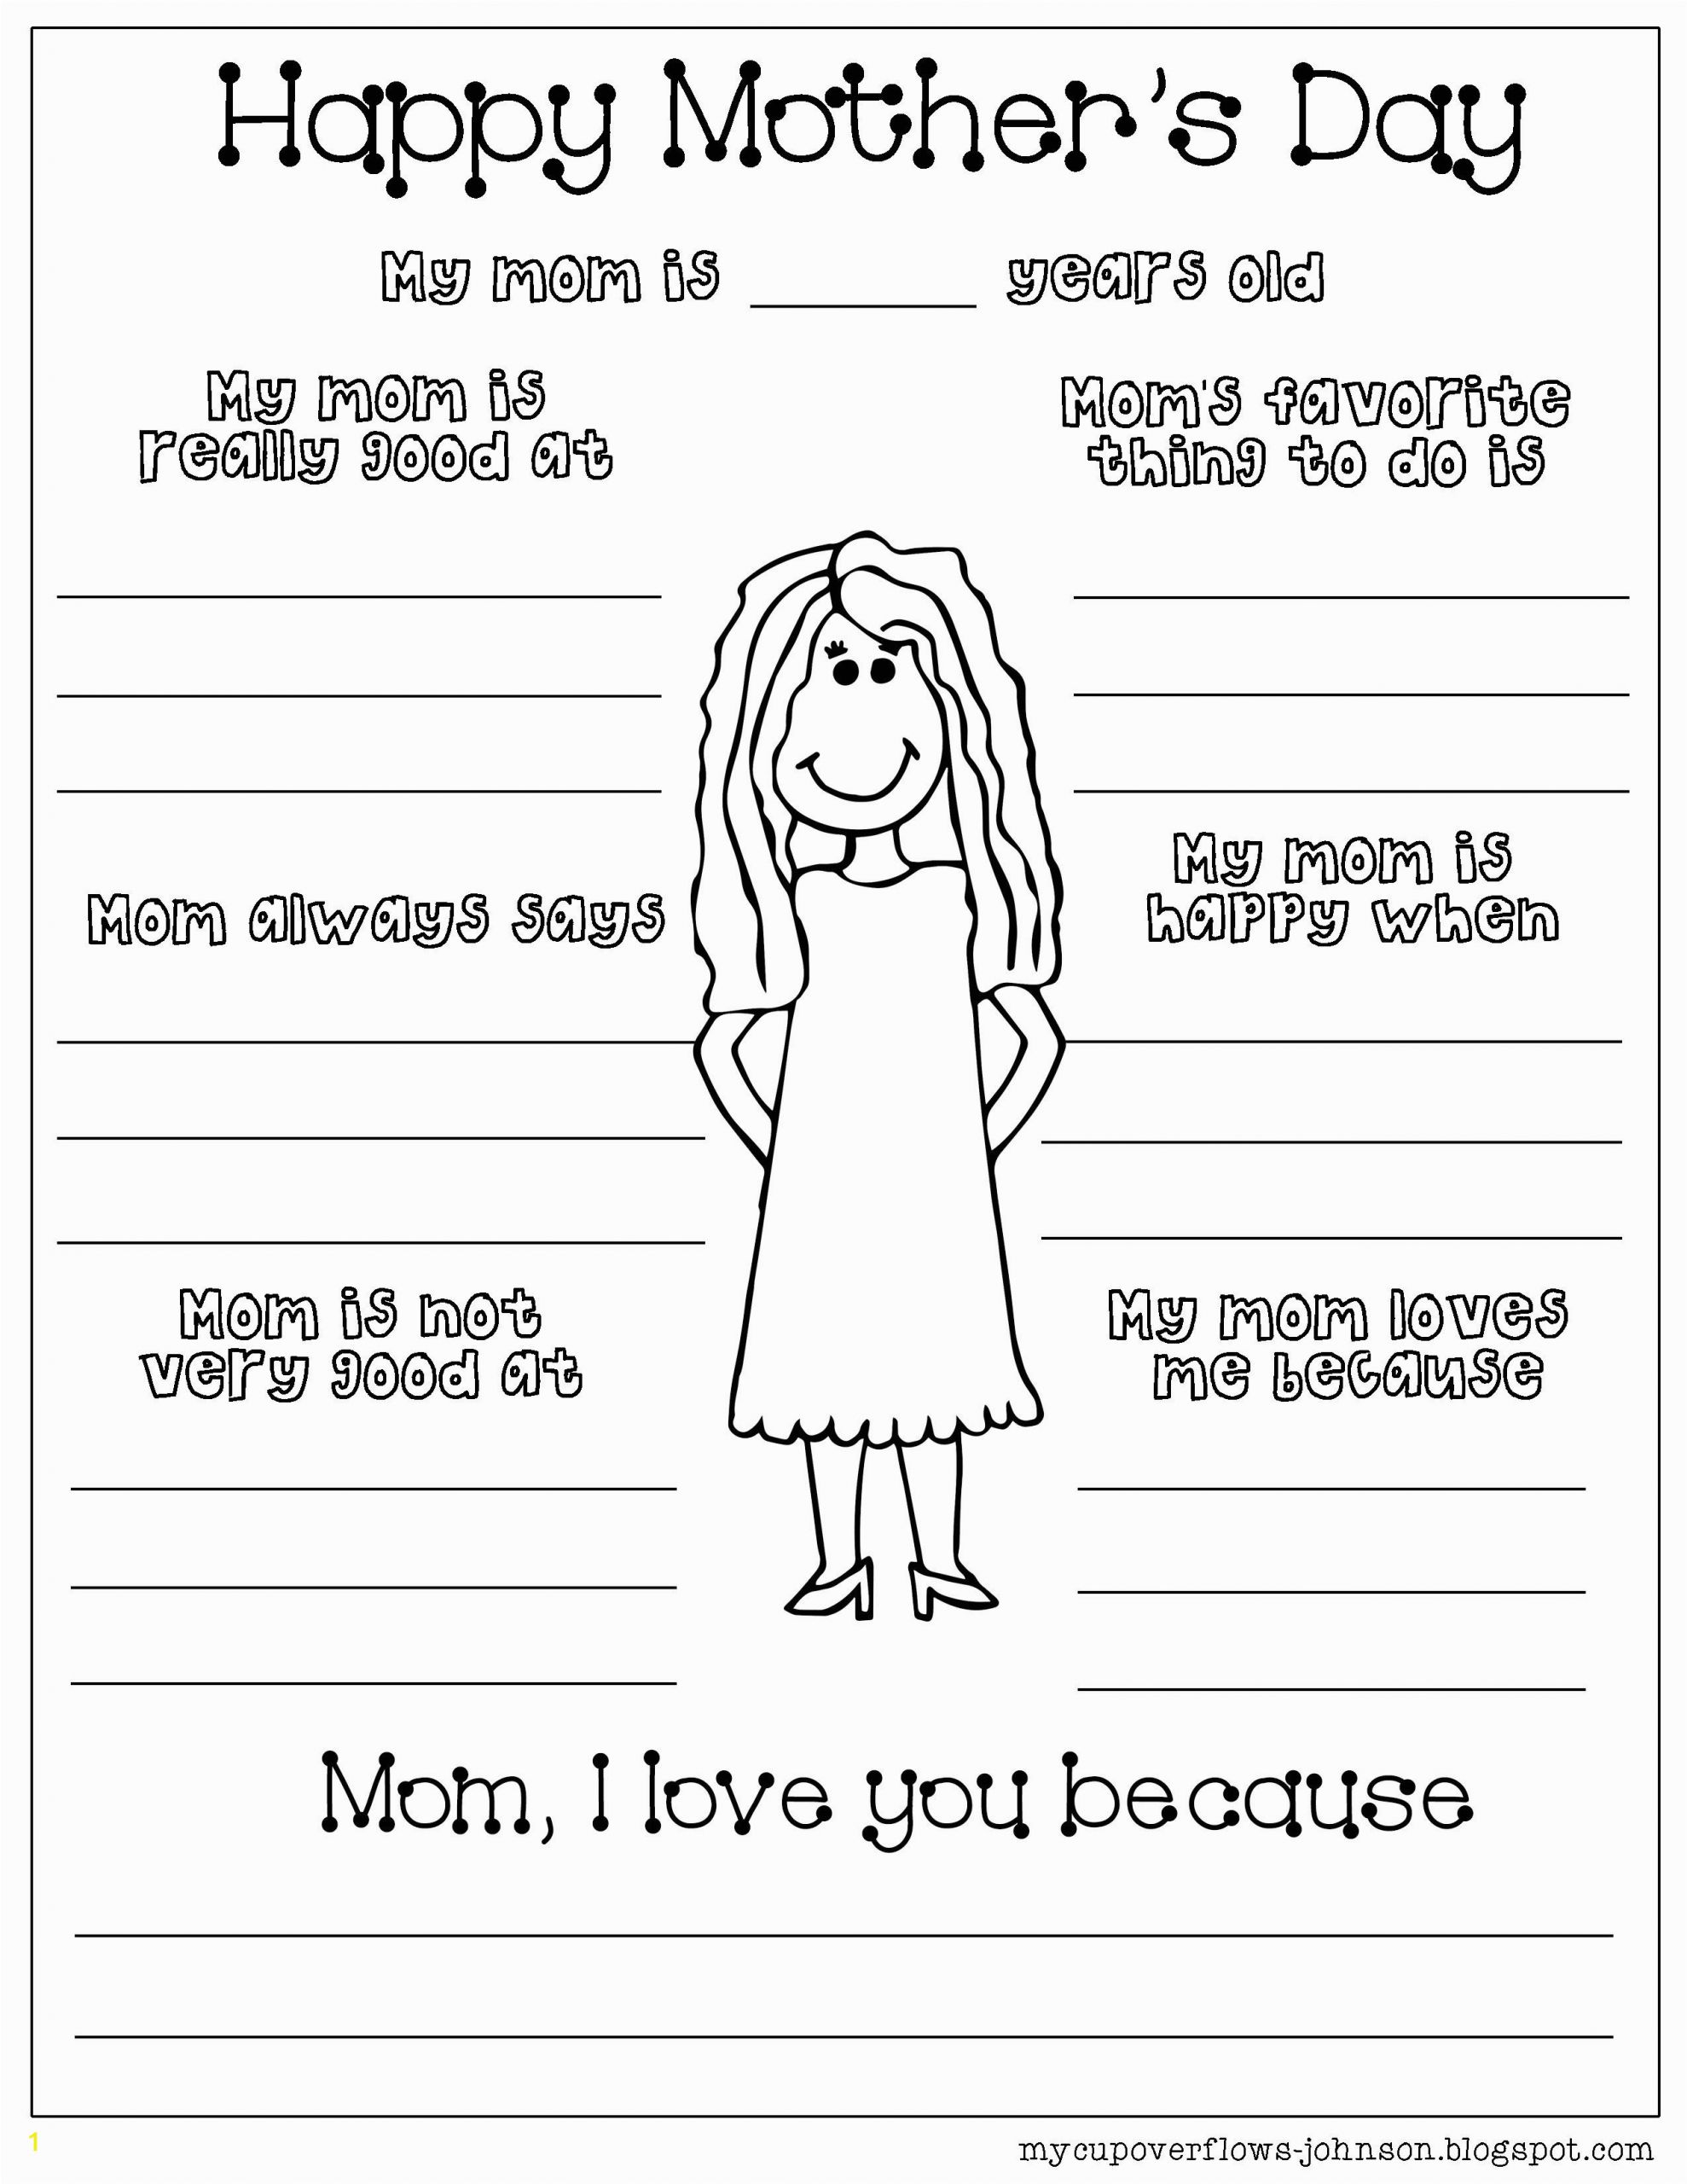 Coloring Pages for Your Mom Mother S Day Coloring Pages